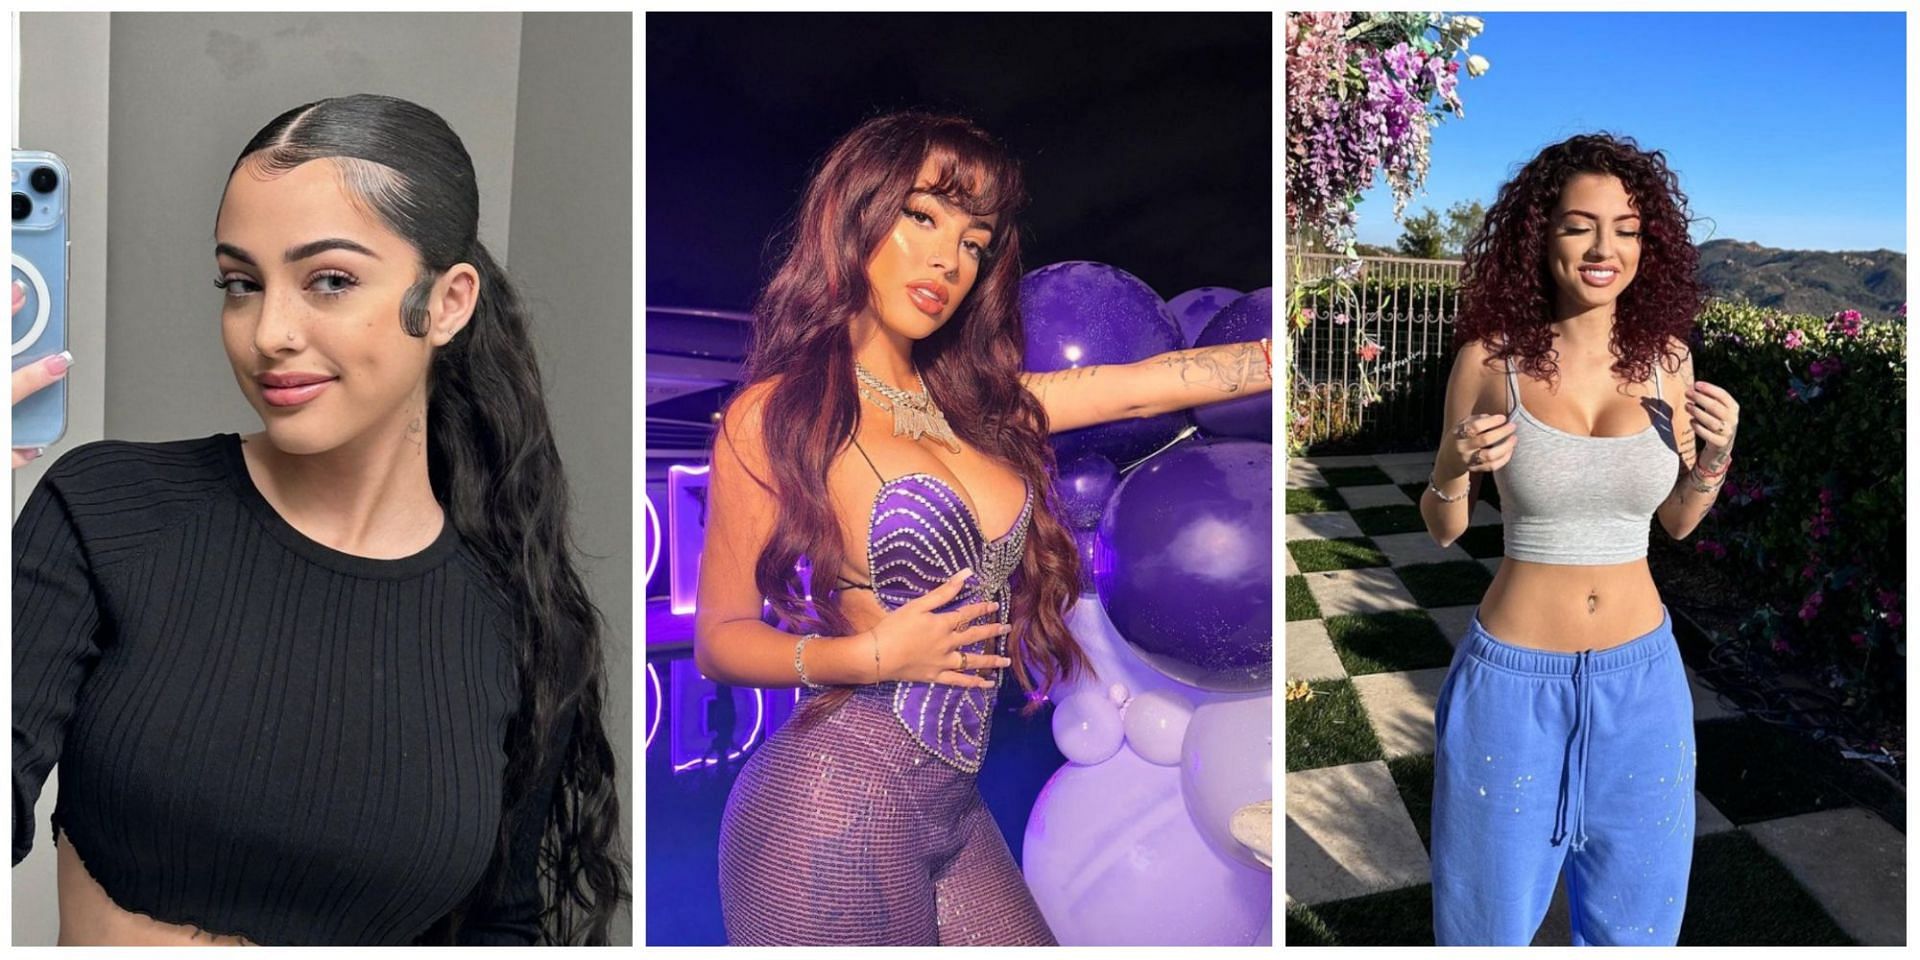 Popular TikTok star and singer Malu Trevejo sued by four of her former employees: Details about the lawsuit explored. (Image via Instagram)